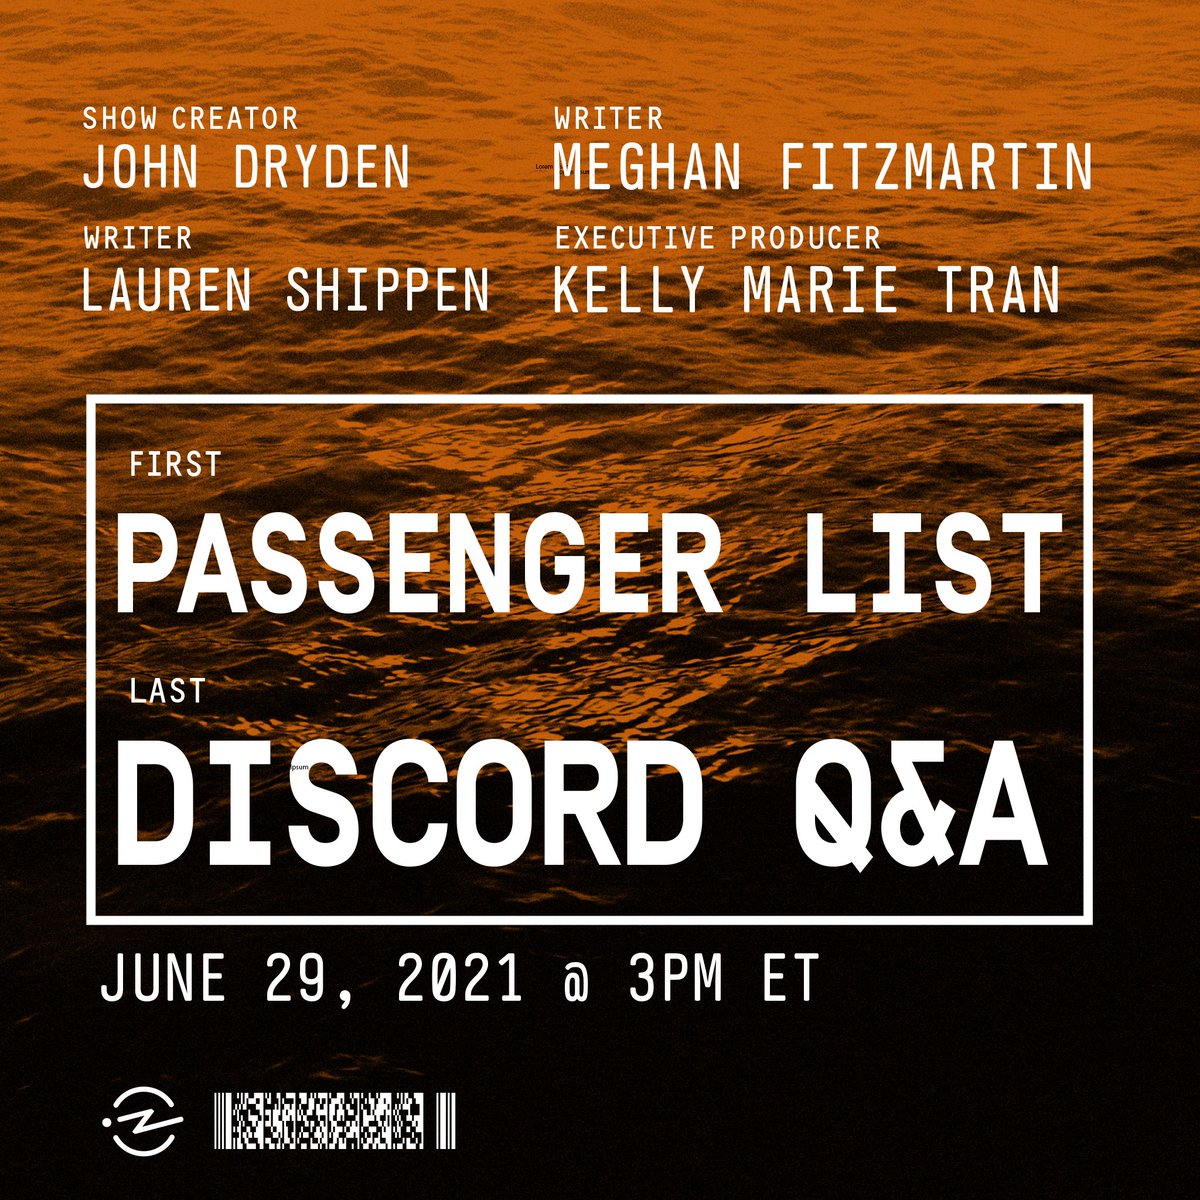 Calling all @passengerpod fans: we're hosting a Q&A next week in The Investigation Discord server with @johnscottdryden, @laurenshippen, @megfitz89 and Kelly Marie Tran! Moderated by @yourpaljonathan of @TheTruthFiction 🎧 Join the server now to attend: discord.gg/nWfMgSyKwe